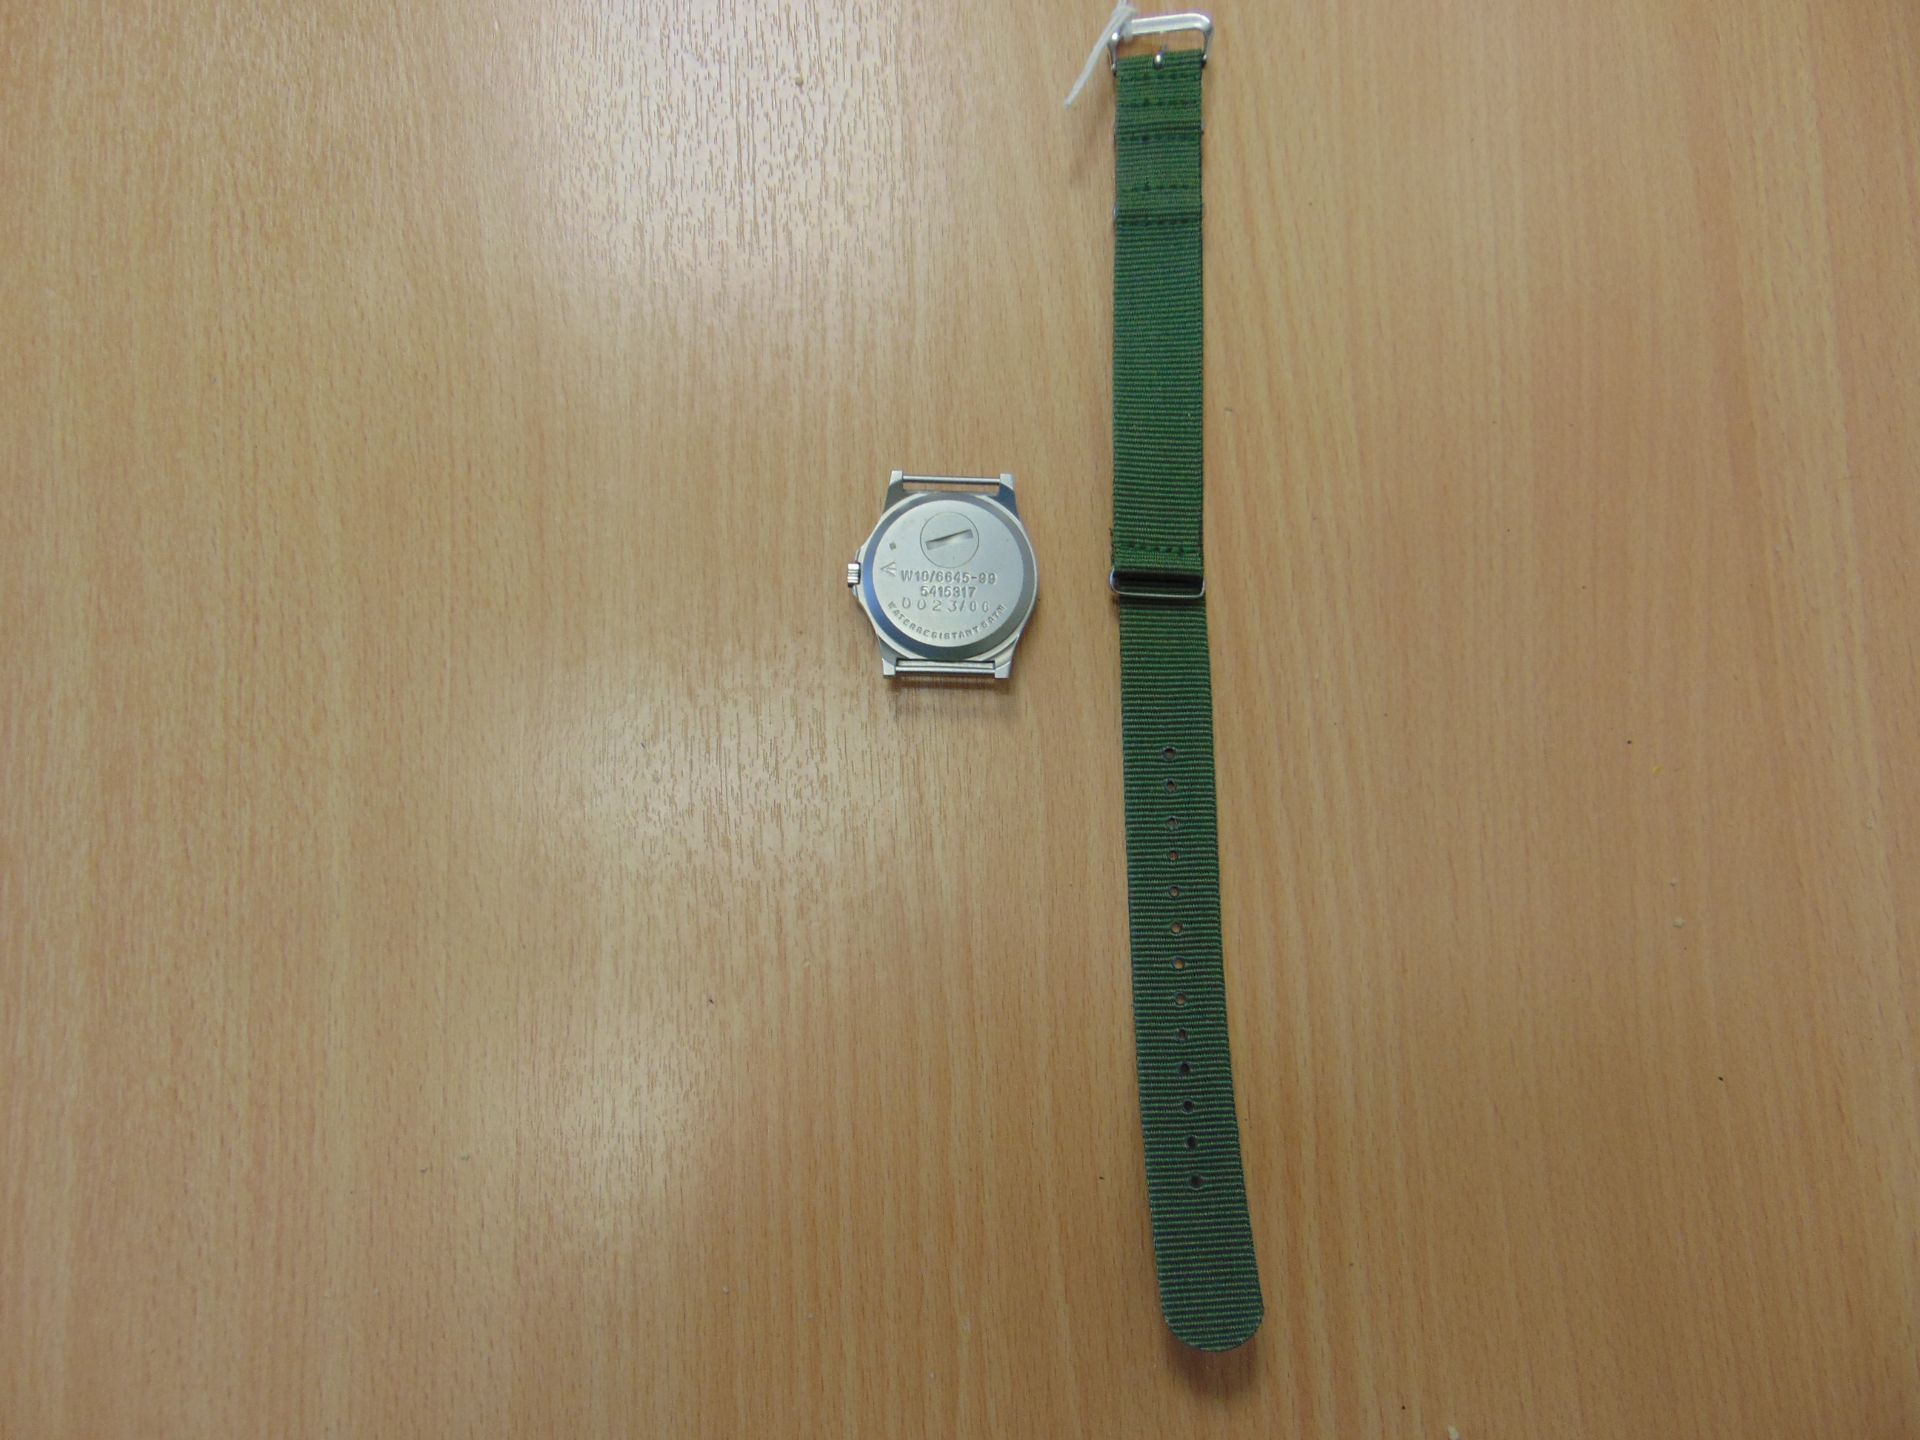 UNISSUED CWC W10 SERVICE WATCH -WATER RESISTENT TO 5ATM NATO MARKED DATED 2006 - Image 8 of 10